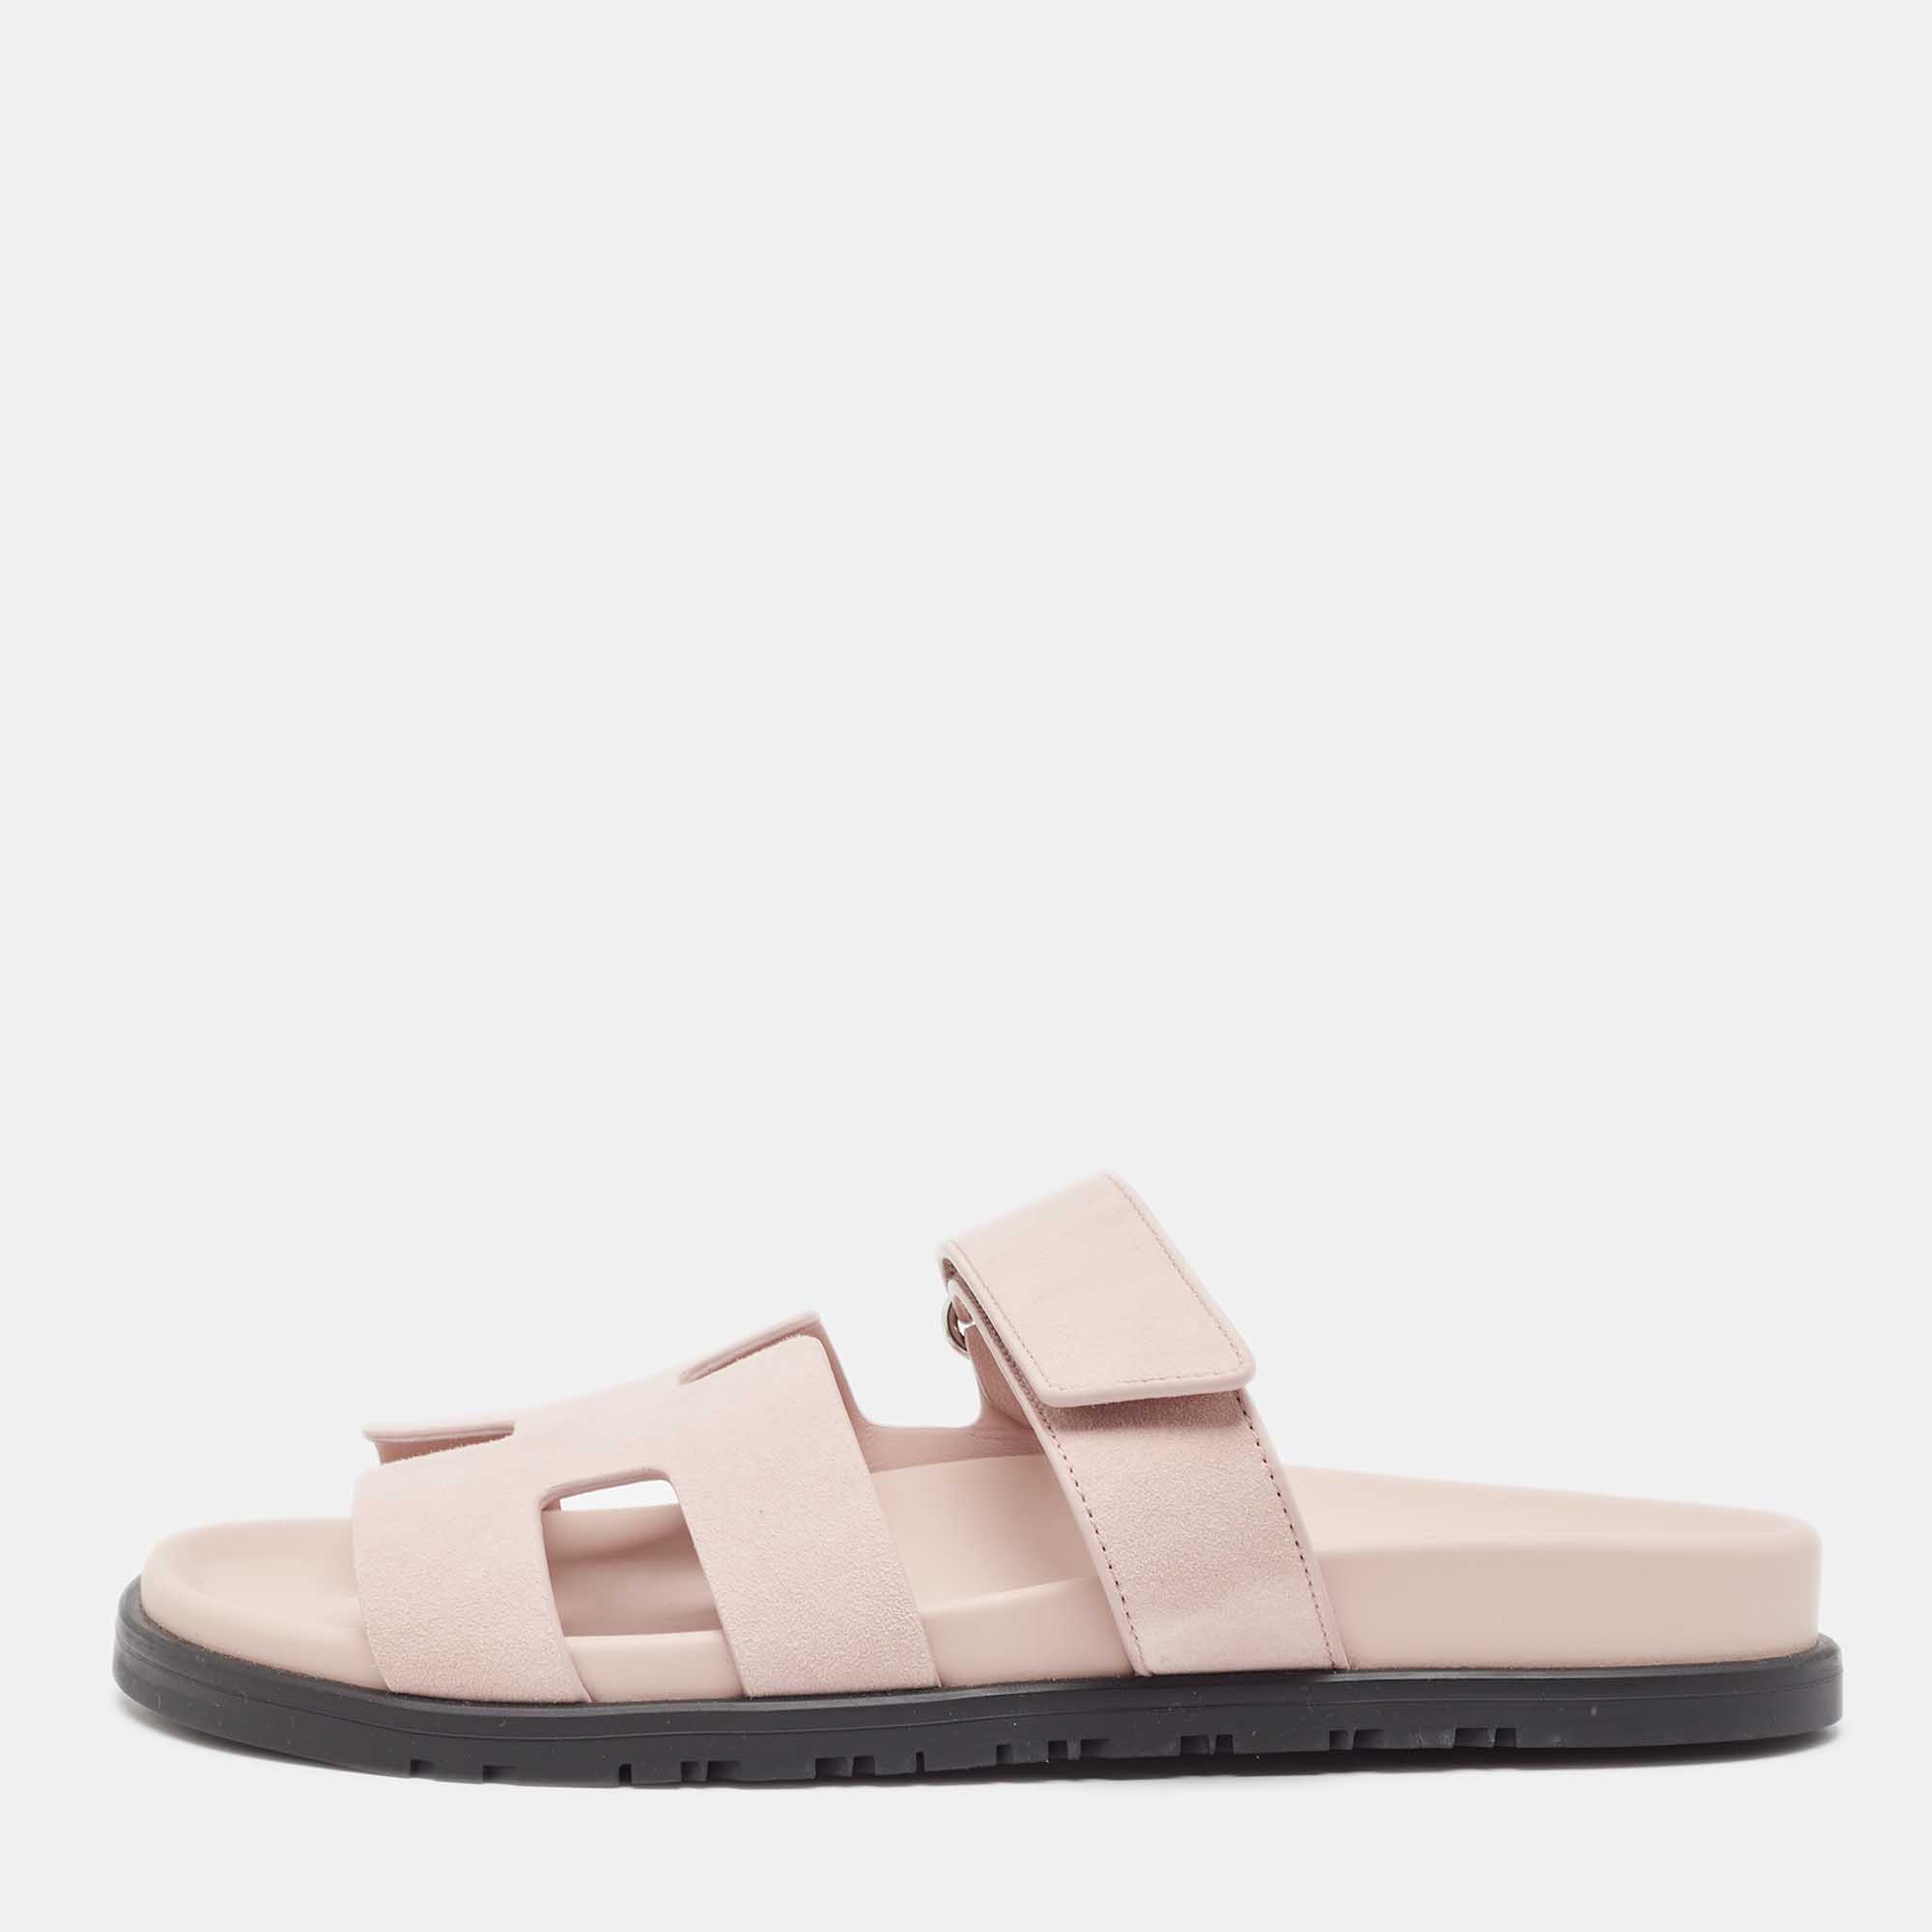 Hermes pink suede chypre sandals size 39